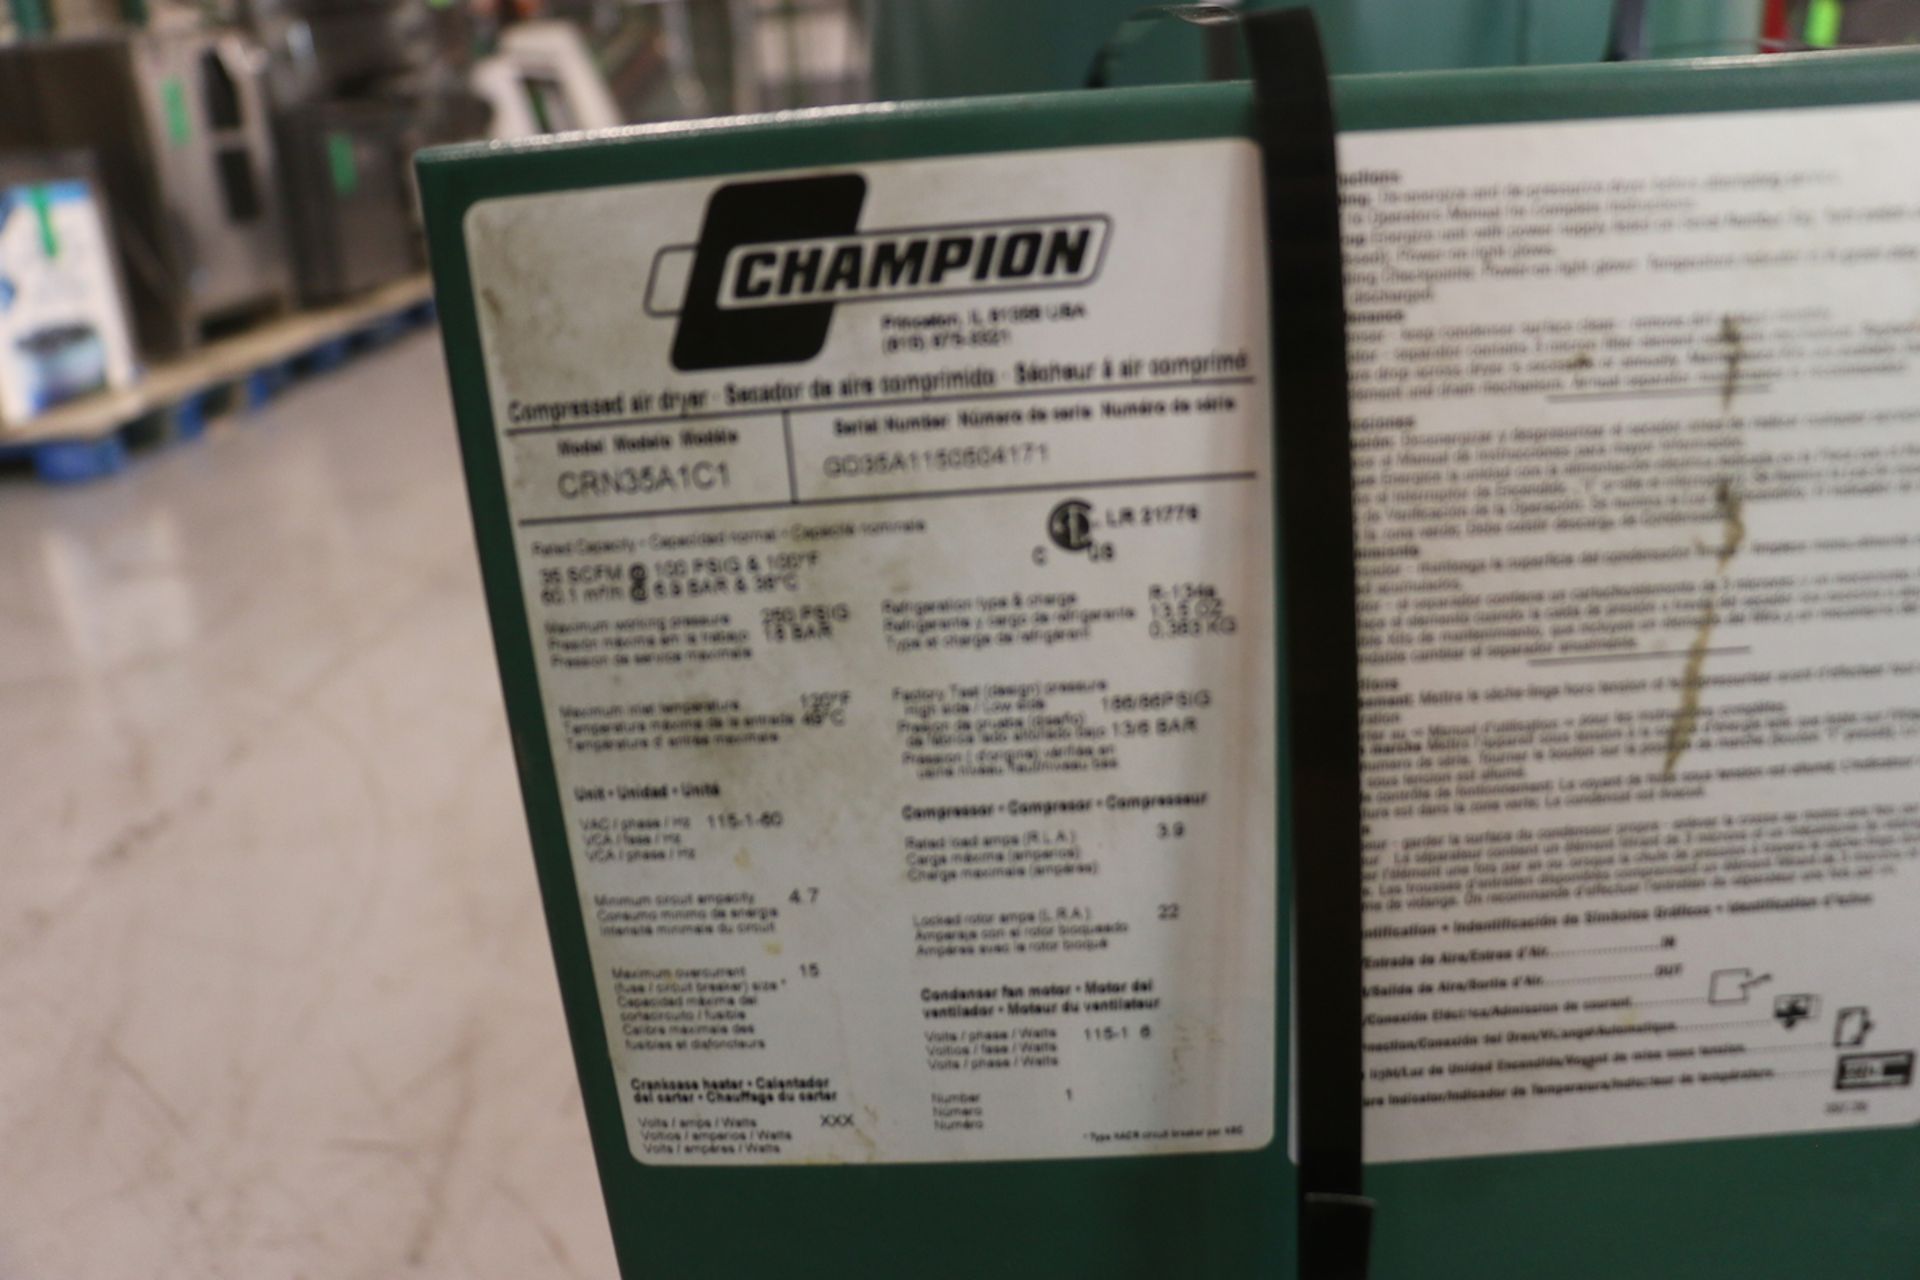 Champion 10 hp Reciprocating Air Compressor, Model VR10-12, S/N R30-59176 with 120 Gal. Vertical - Image 11 of 12